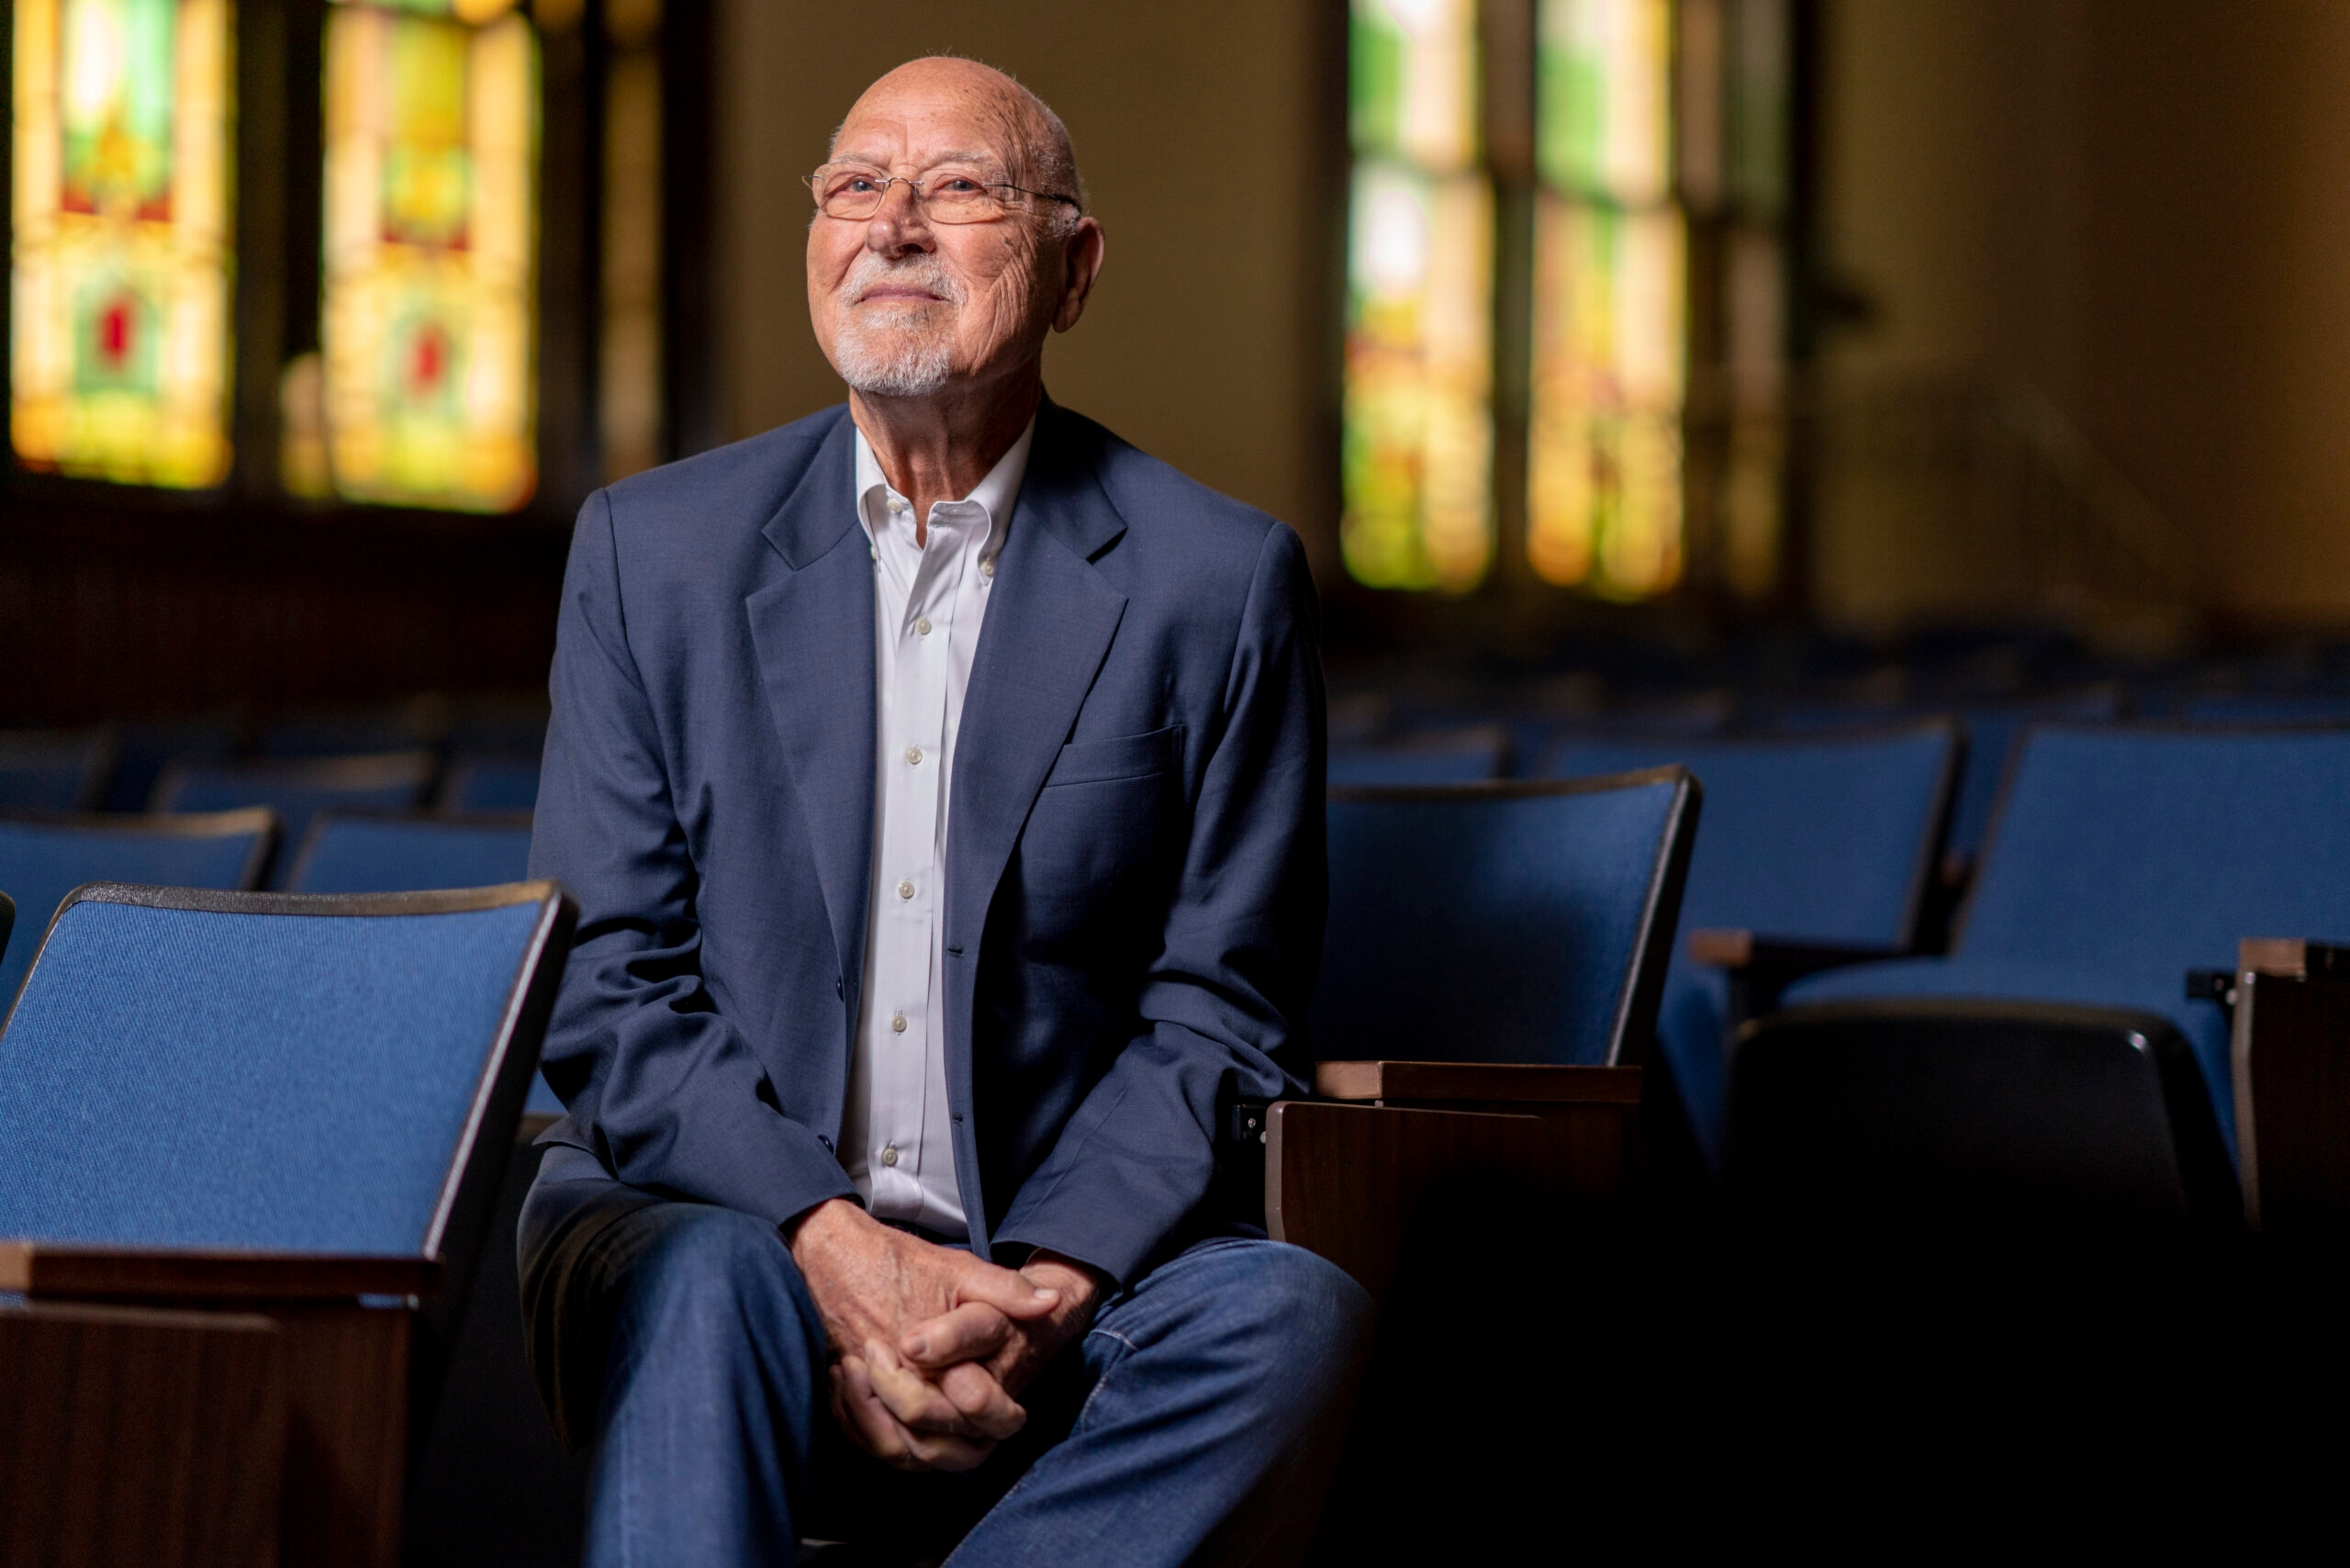 Don Finto (’50) is profiled as the most recent recipient of ACU’s Dale and Rita Brown Outlive Your Life Award.